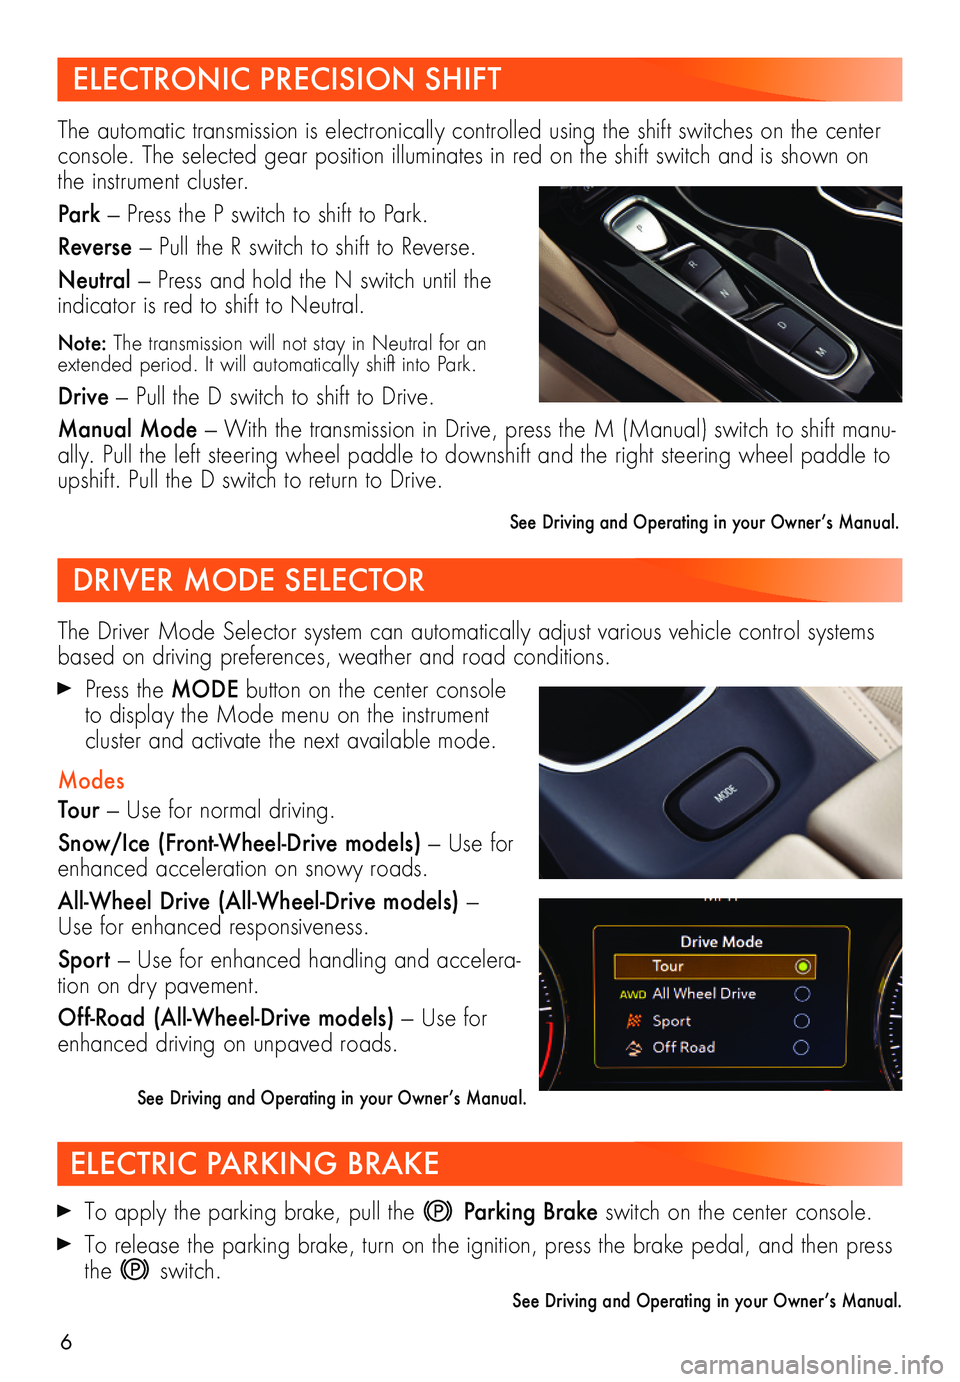 BUICK ENVISION 2021  Get To Know Guide 6
ELECTRONIC PRECISION SHIFT
DRIVER MODE SELECTOR
ELECTRIC PARKING BRAKE
 To apply the parking brake, pull the  Parking Brake switch on the center console.
 To release the parking brake, turn on the i